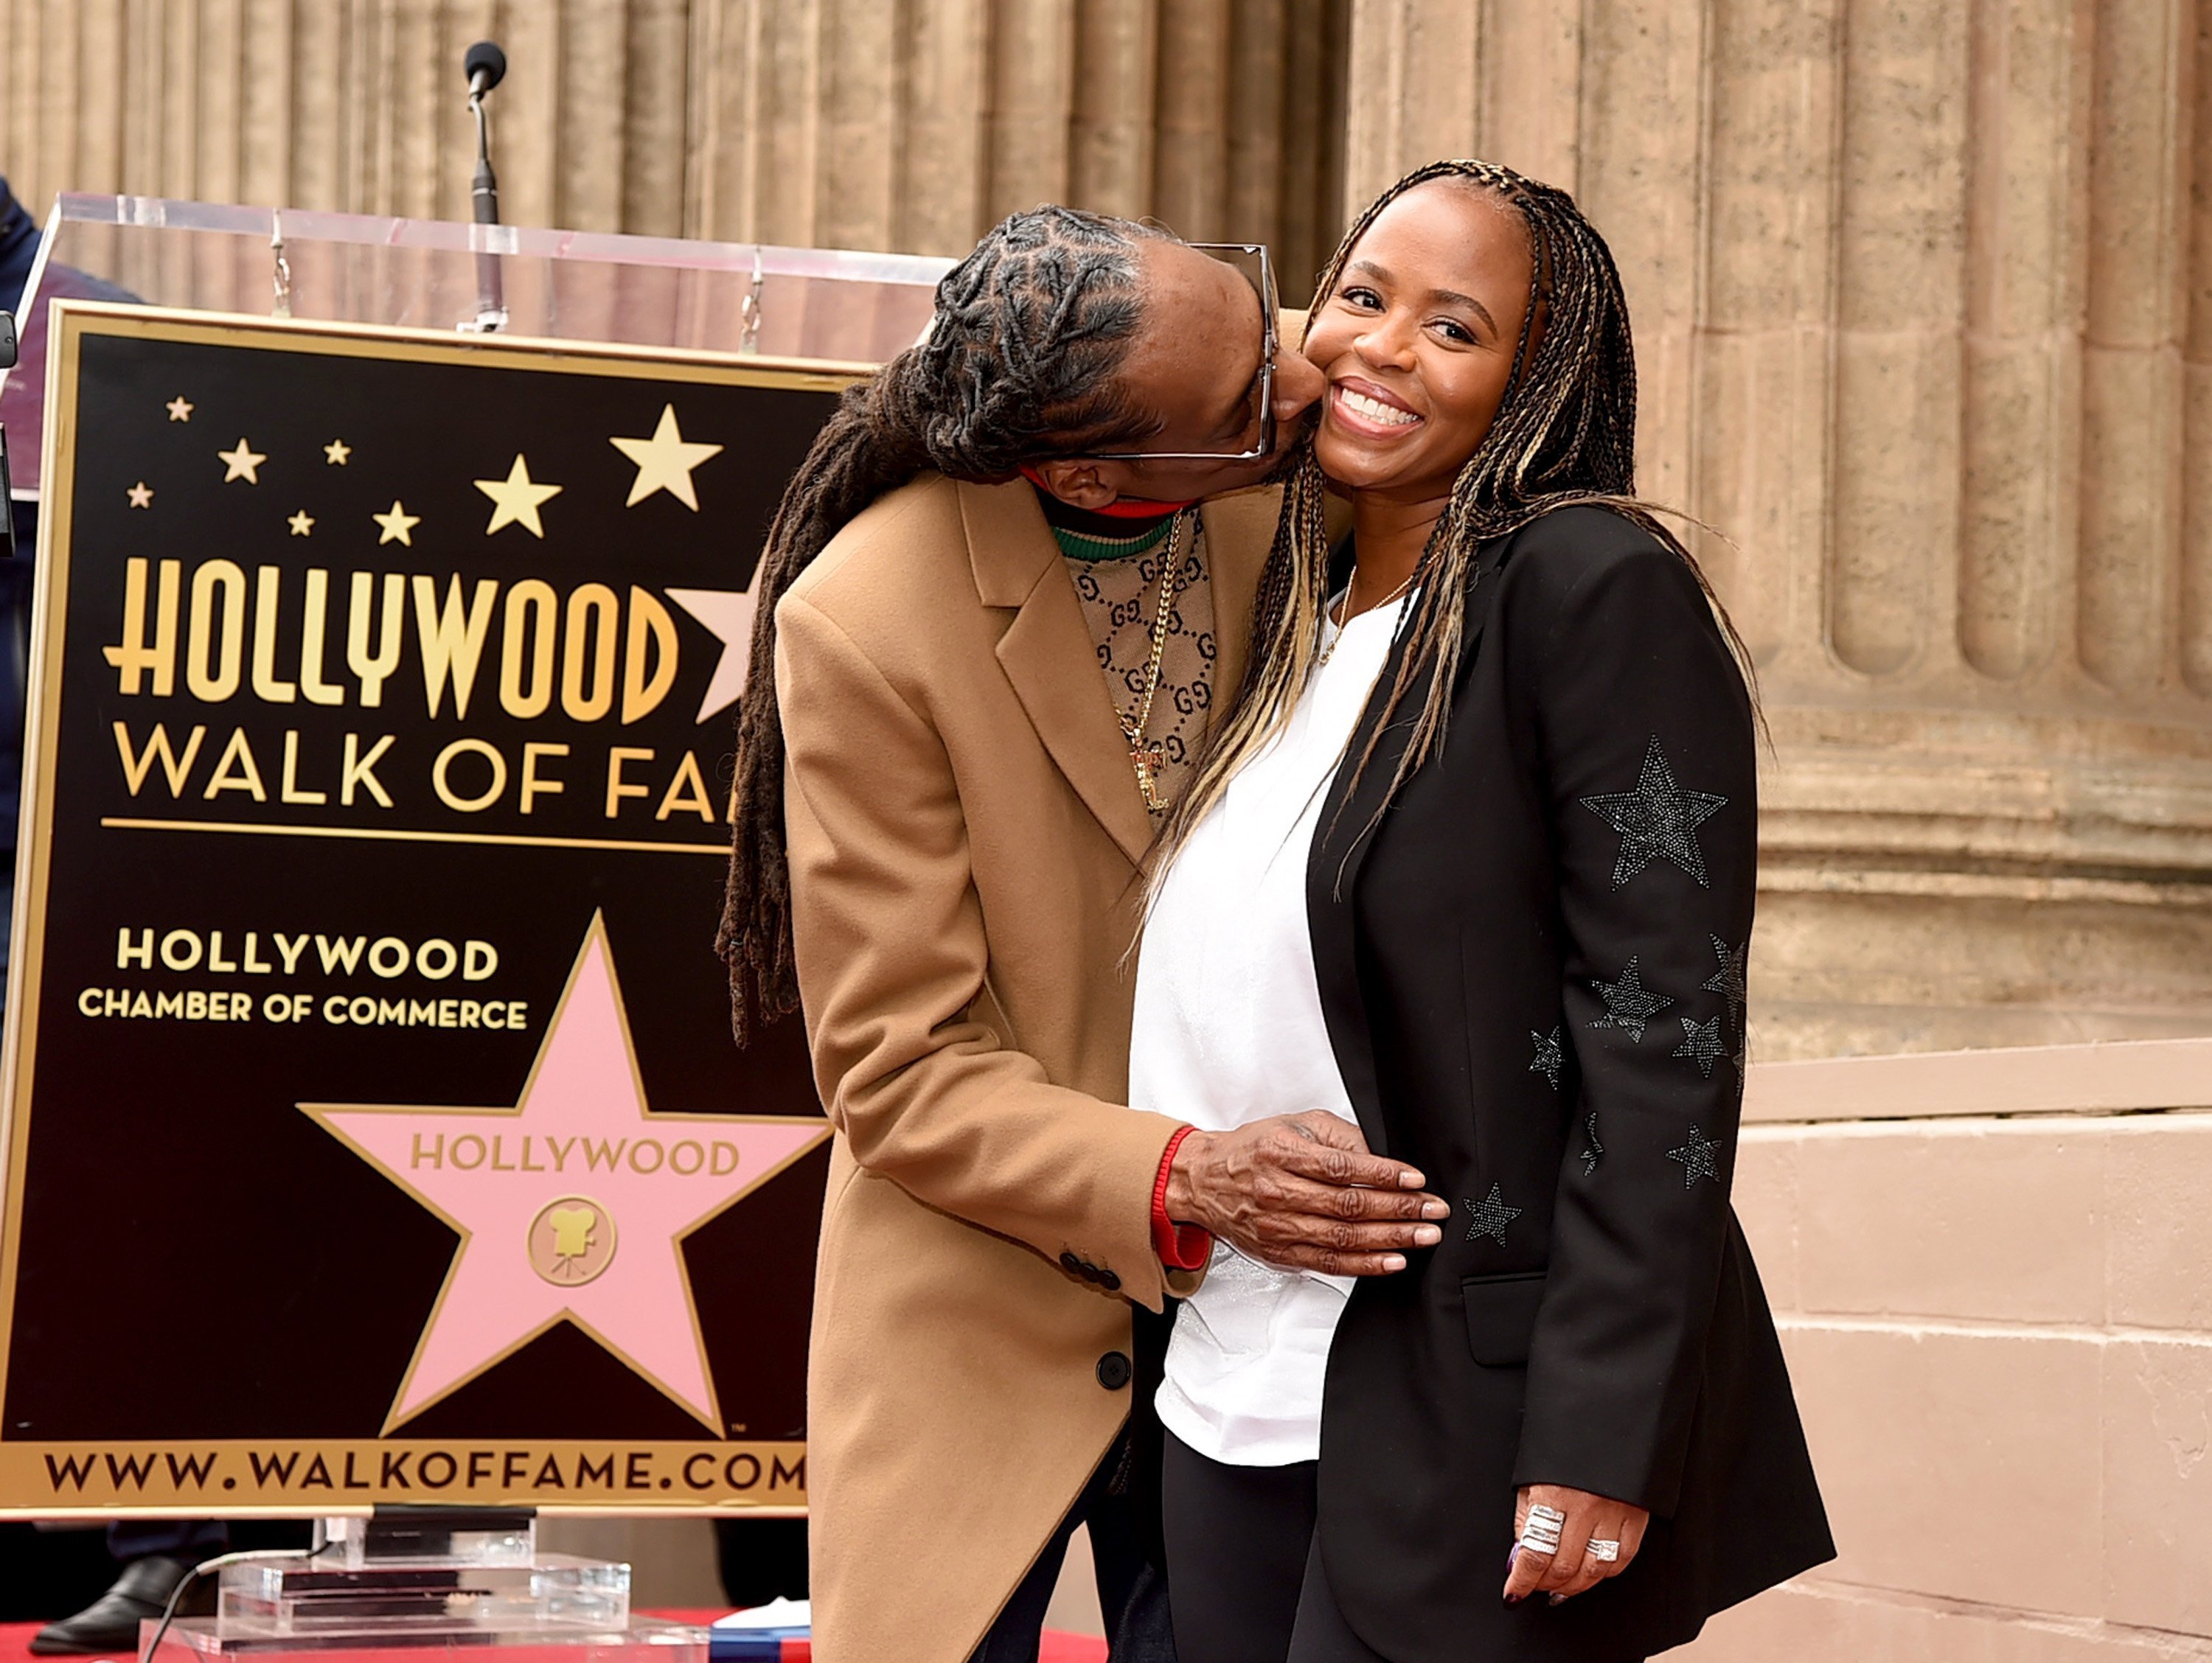 Snoop Dogg and Shante Broadus at The Hollywood Walk of Fame on Hollywood Boulevard on November 19, 2018. | Source: Getty Images